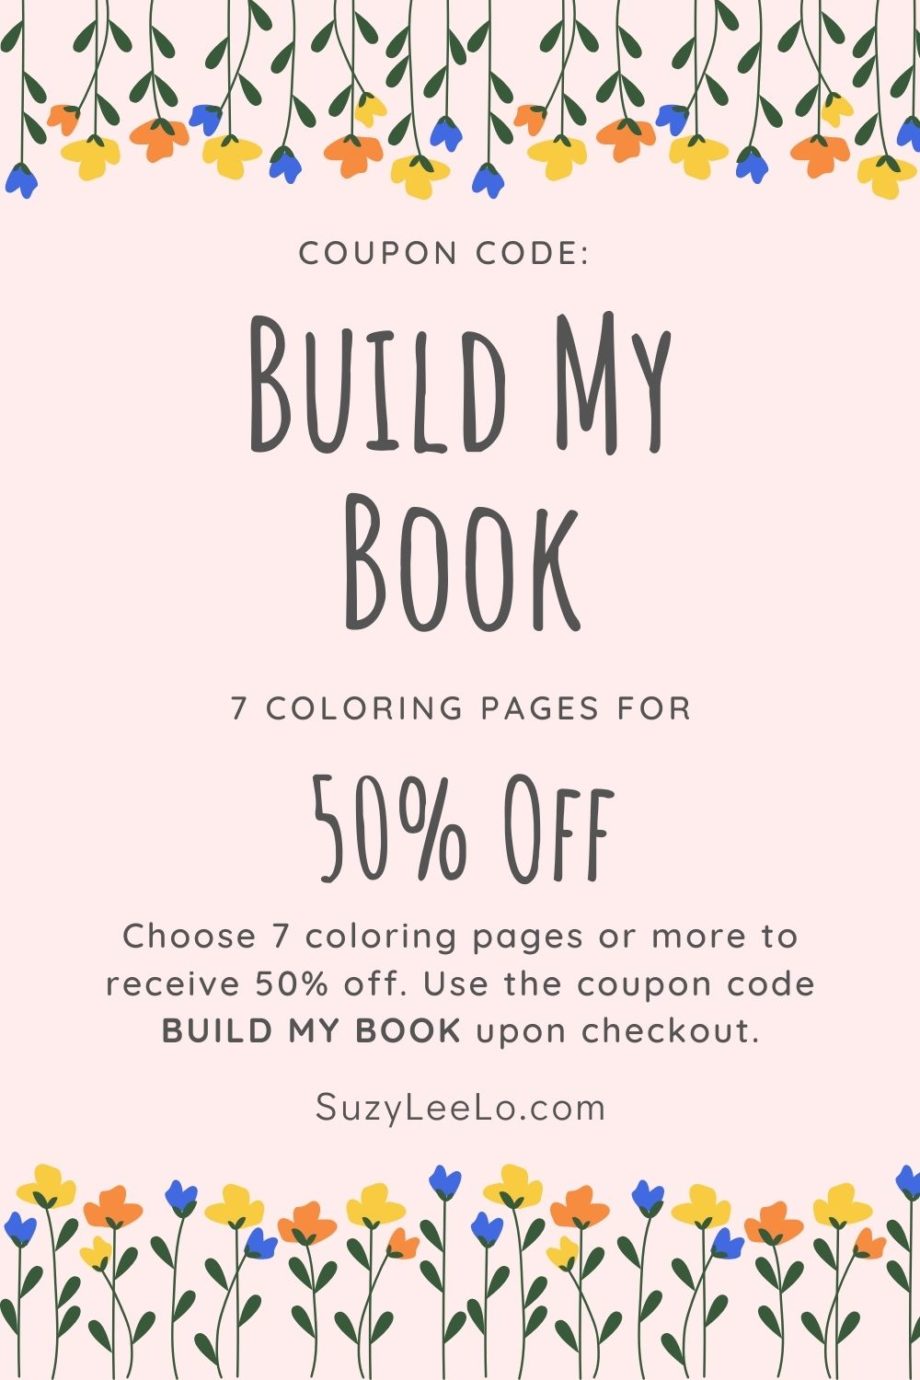 Build your coloring Book Coupon Code from SuzyLeeLo